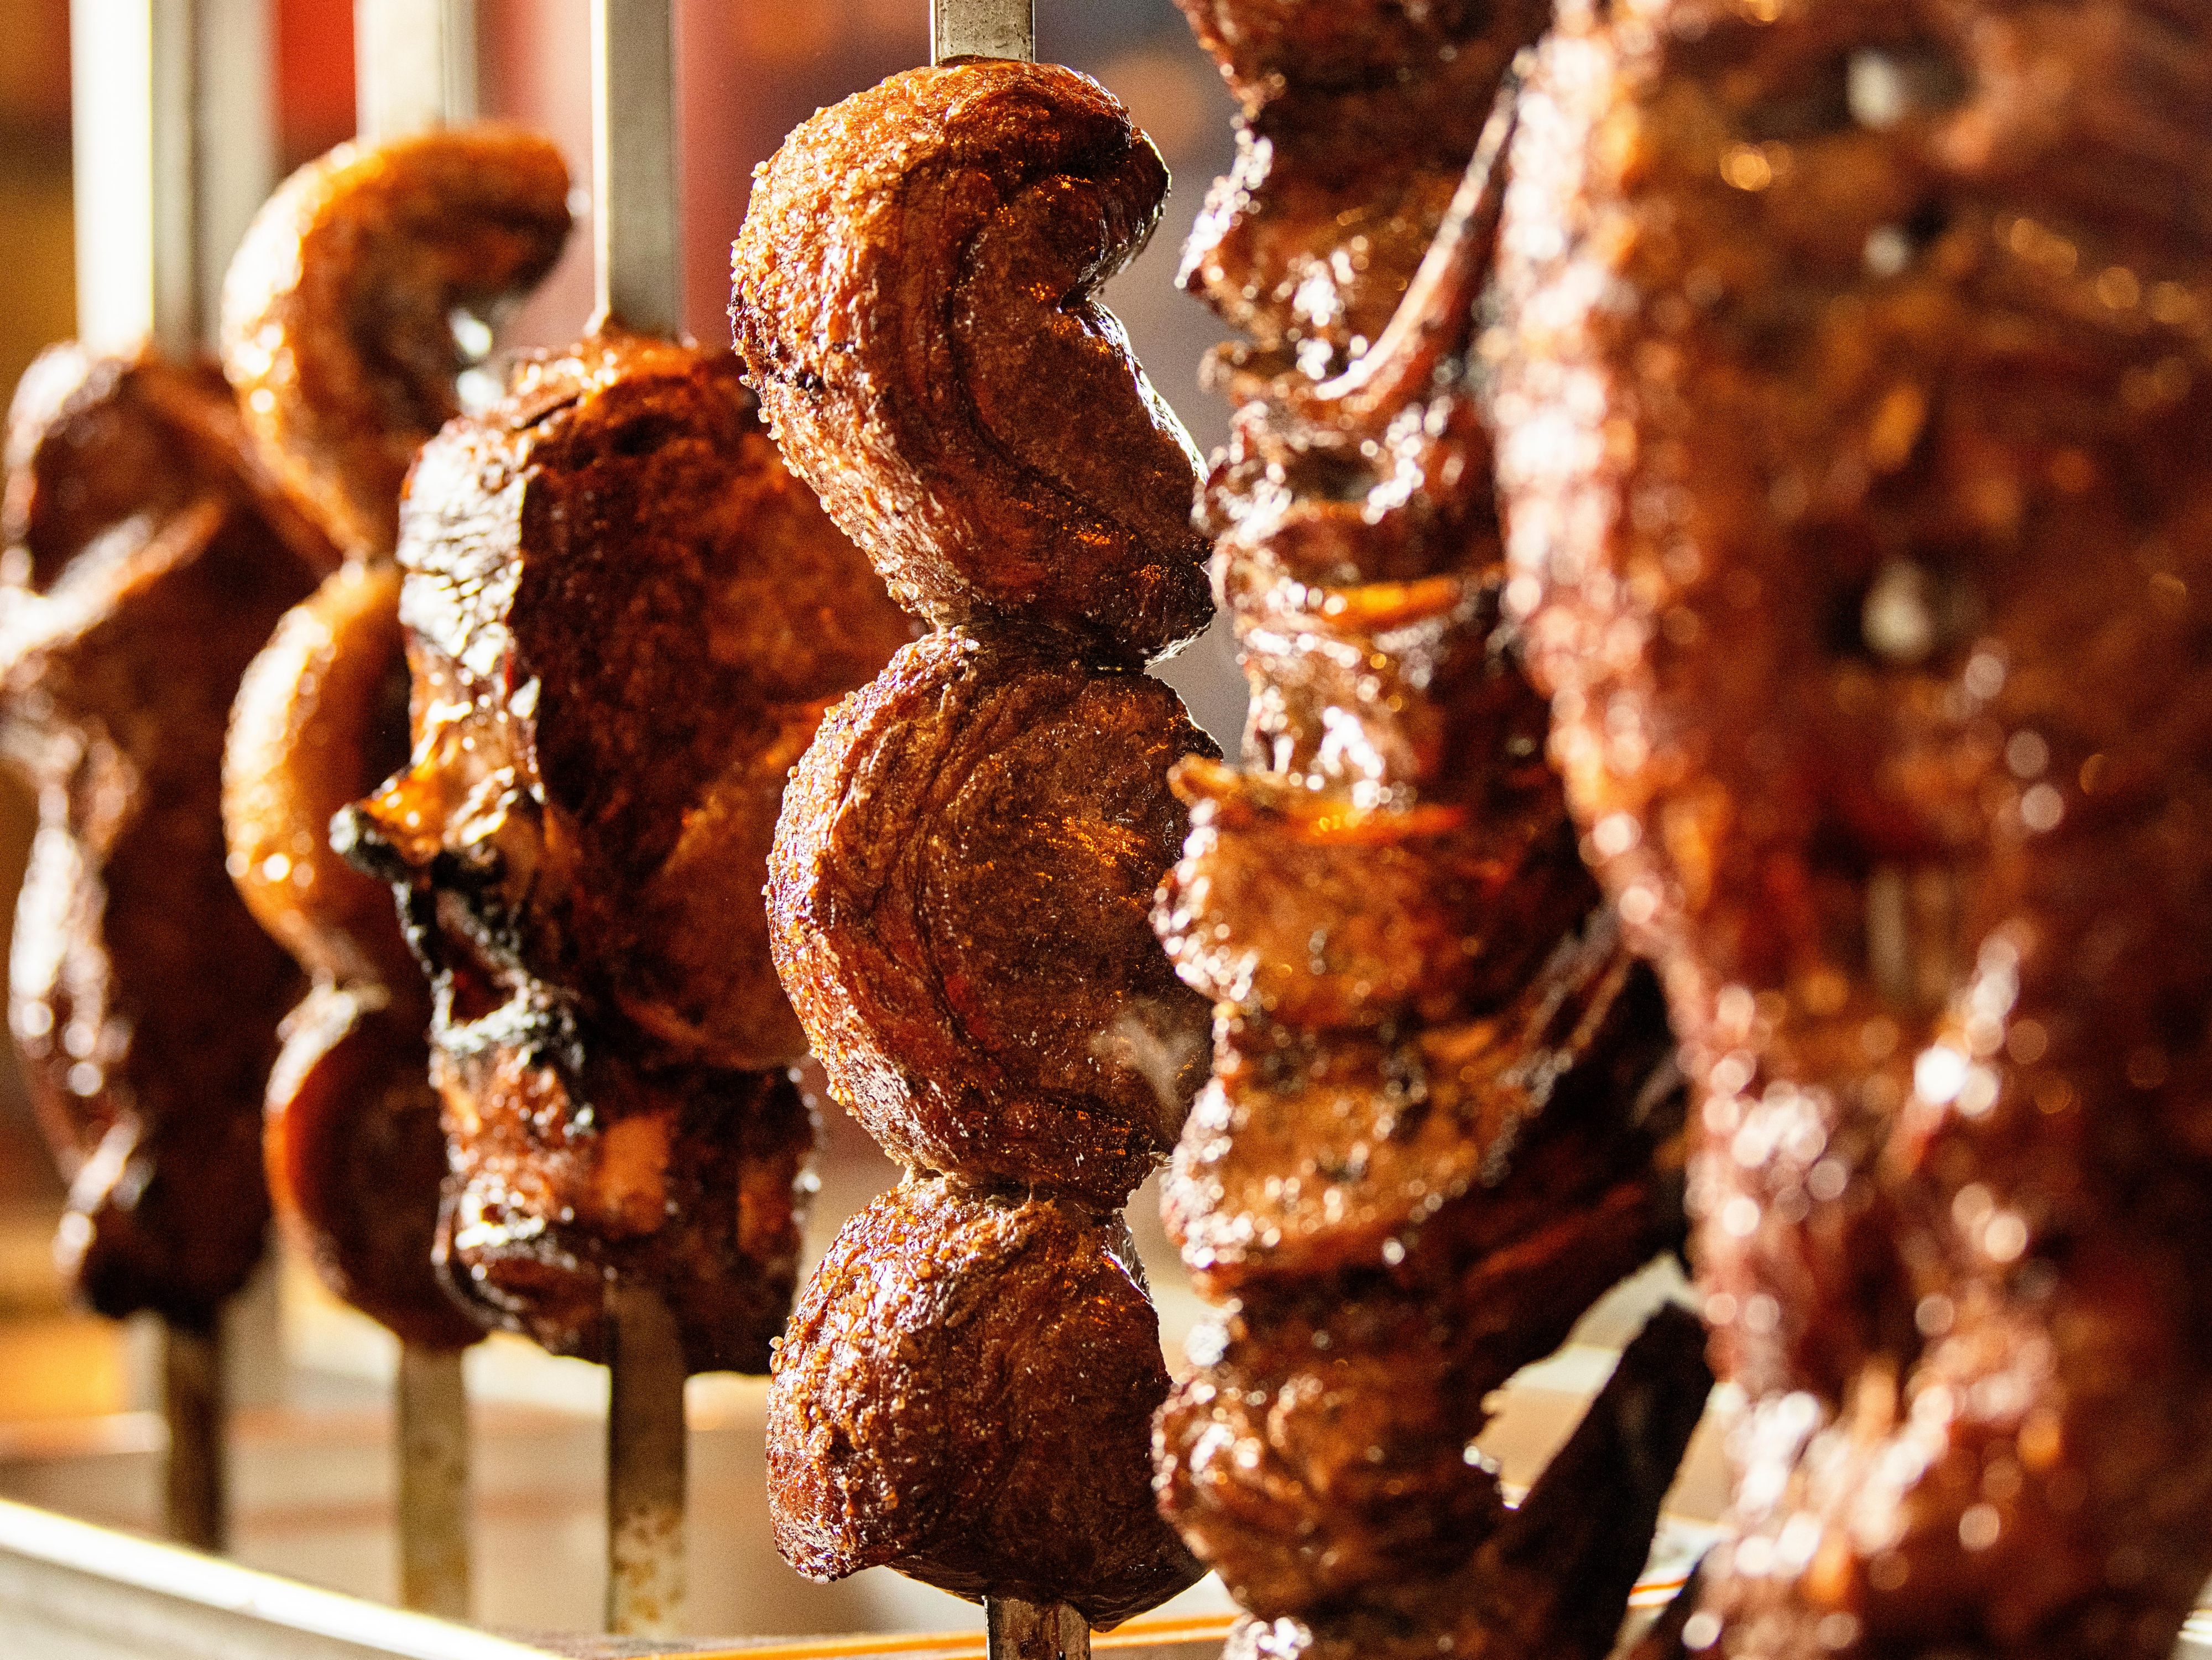 Let's Meat Early at Rodizio!